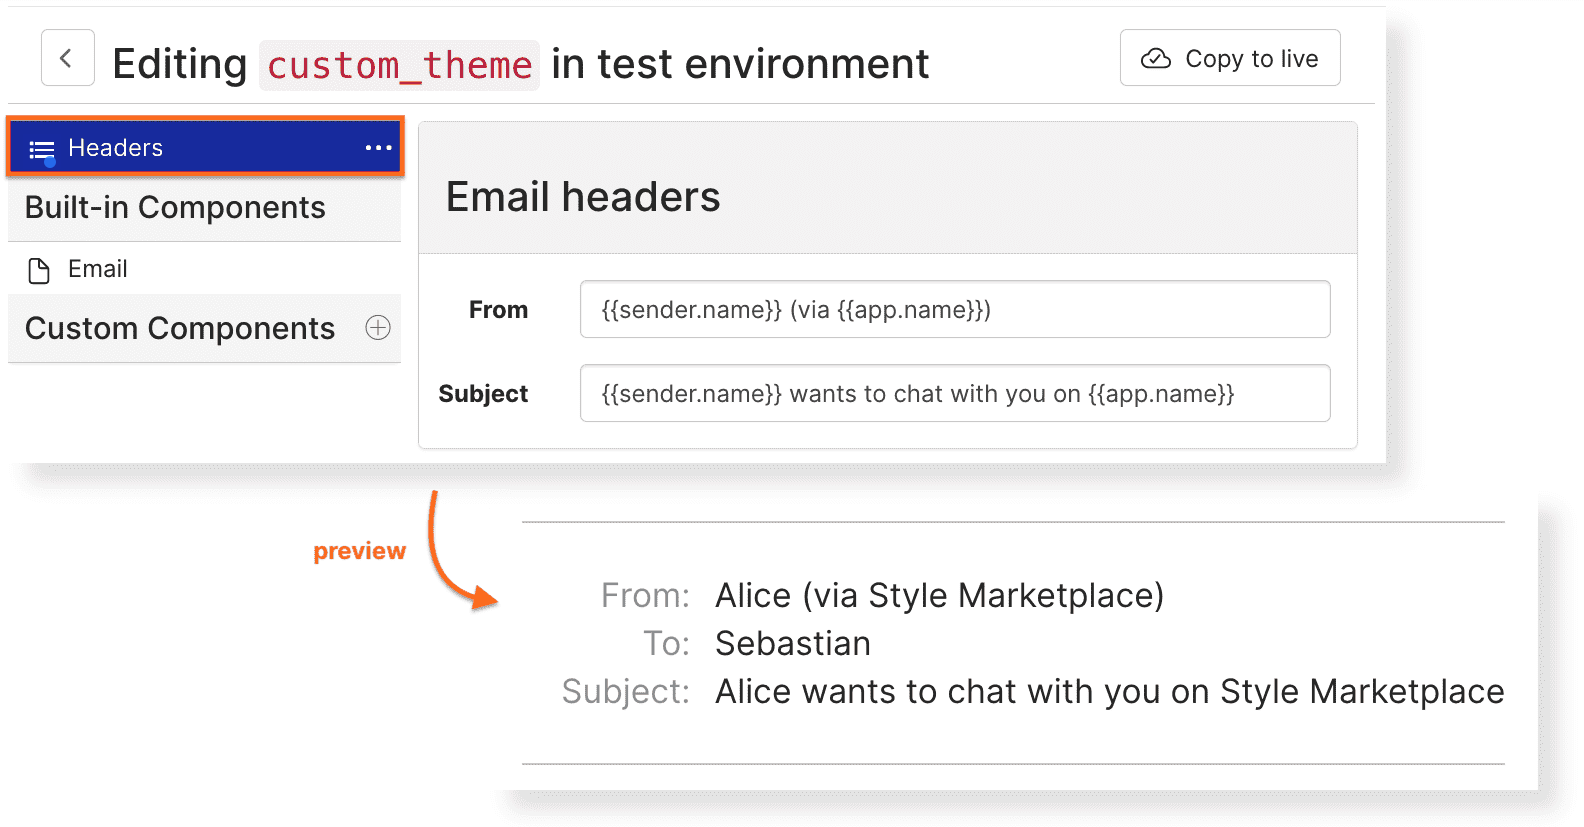 Overview of the email theme editor, with the section 'Headers' selected. An panel with 'Email headers' is open, in which the 'From' and 'Subject' headers can be customized. Below the panel is an arrow to a preview of how the headers would show up in an email.